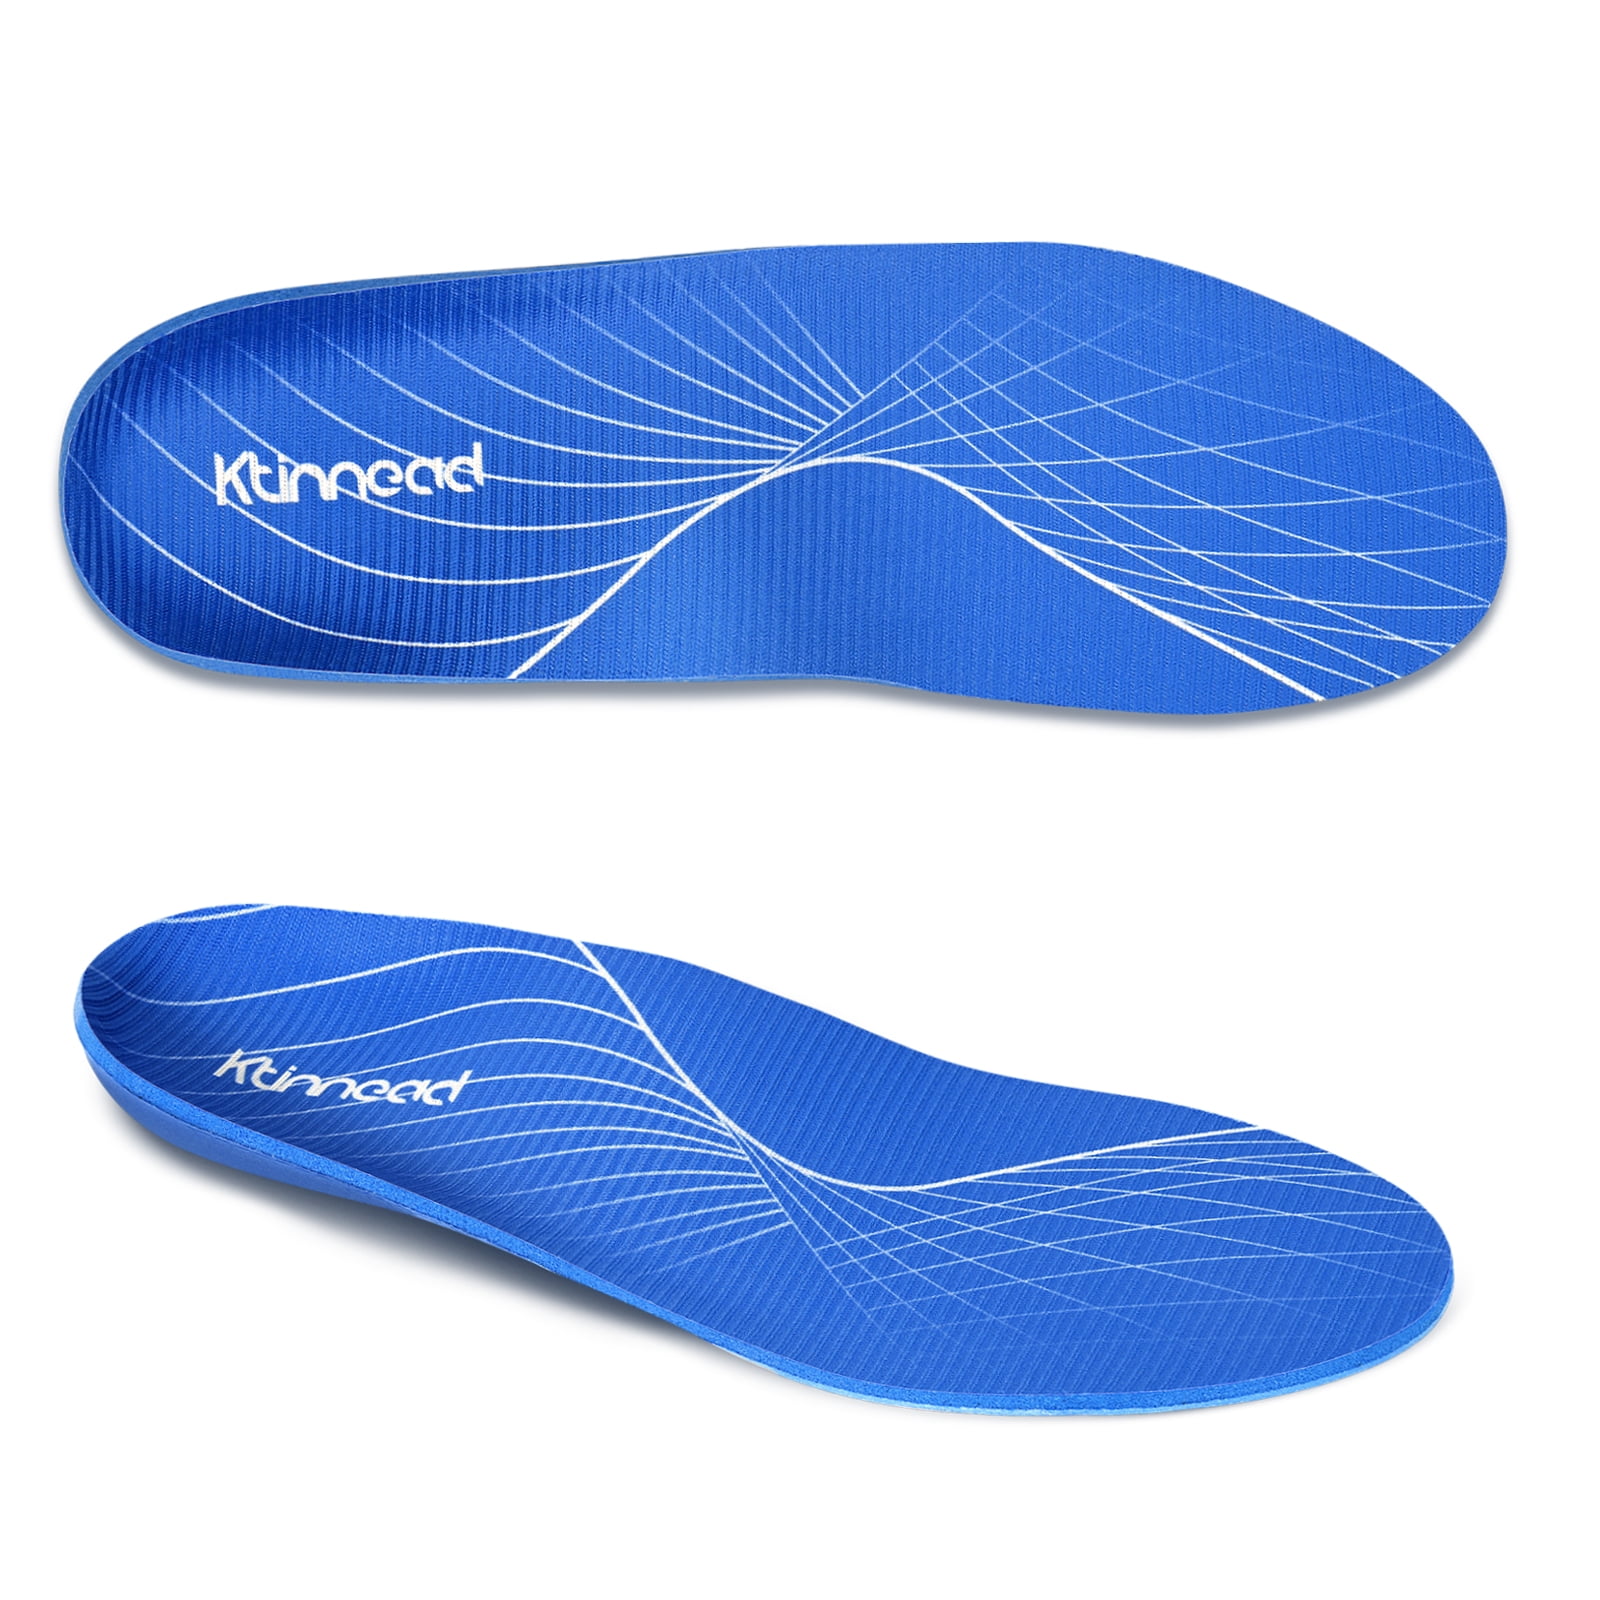 Ktinnead Arch Support Insoles for Men and Women,Plantar Fasciitis ...